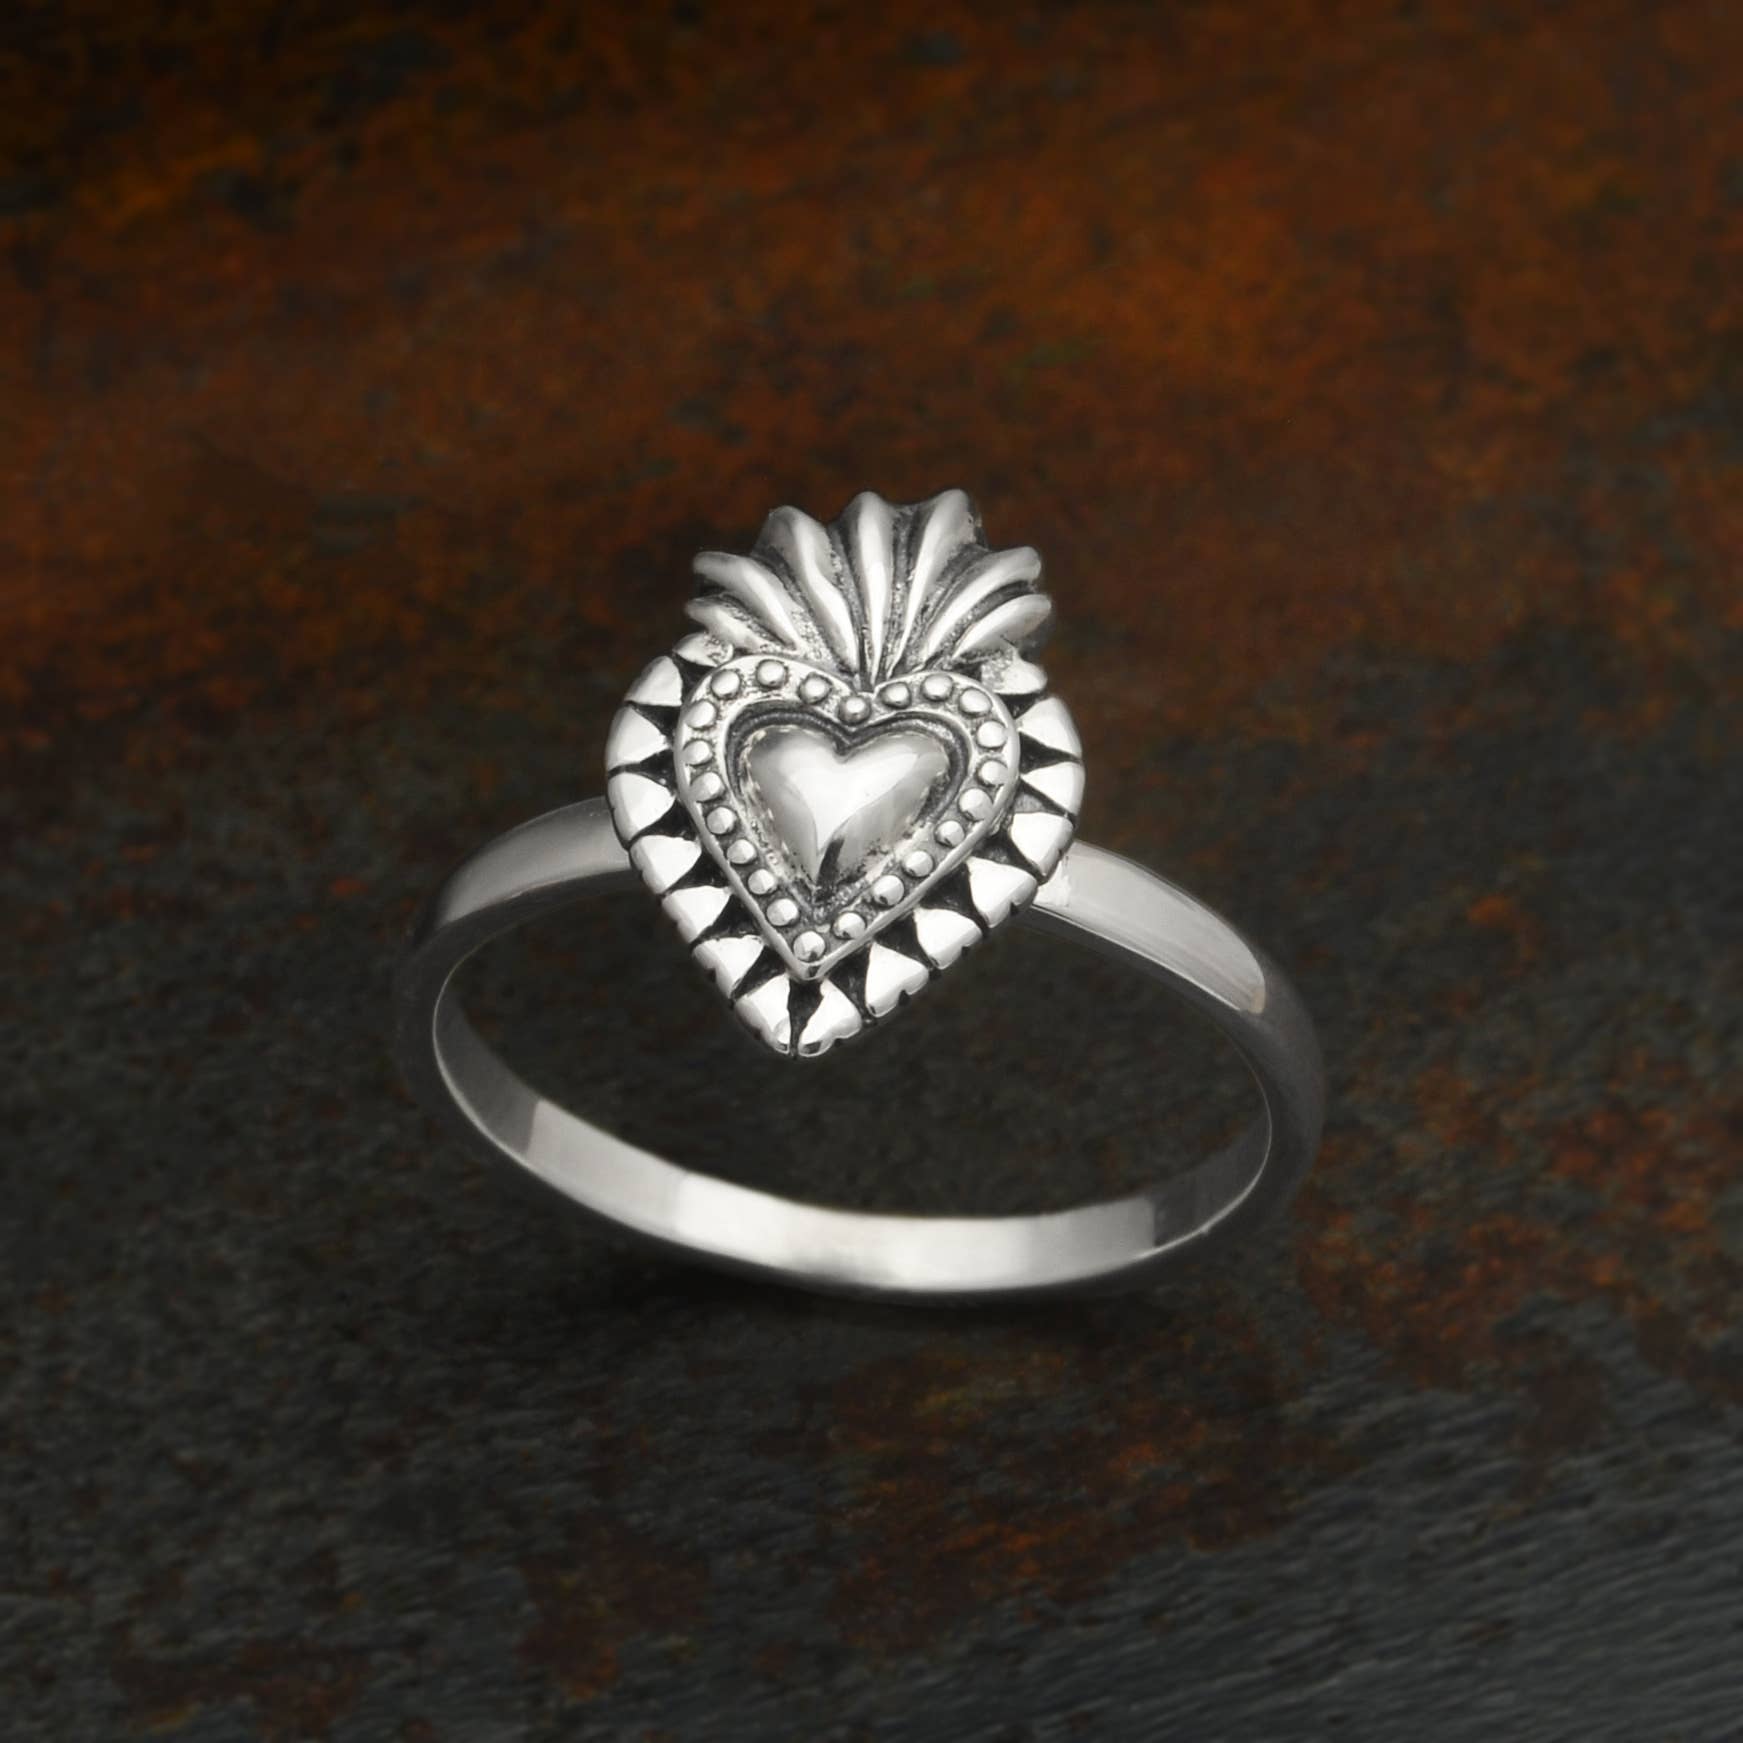 This sterling silver flaming heart ring is both fierce and romantic. Within the Catholic faith, the sacred heart is a medieval symbol of Christ's sacrifice. The sacred heart signifies the redeeming love of God as the source of illumination and happiness.